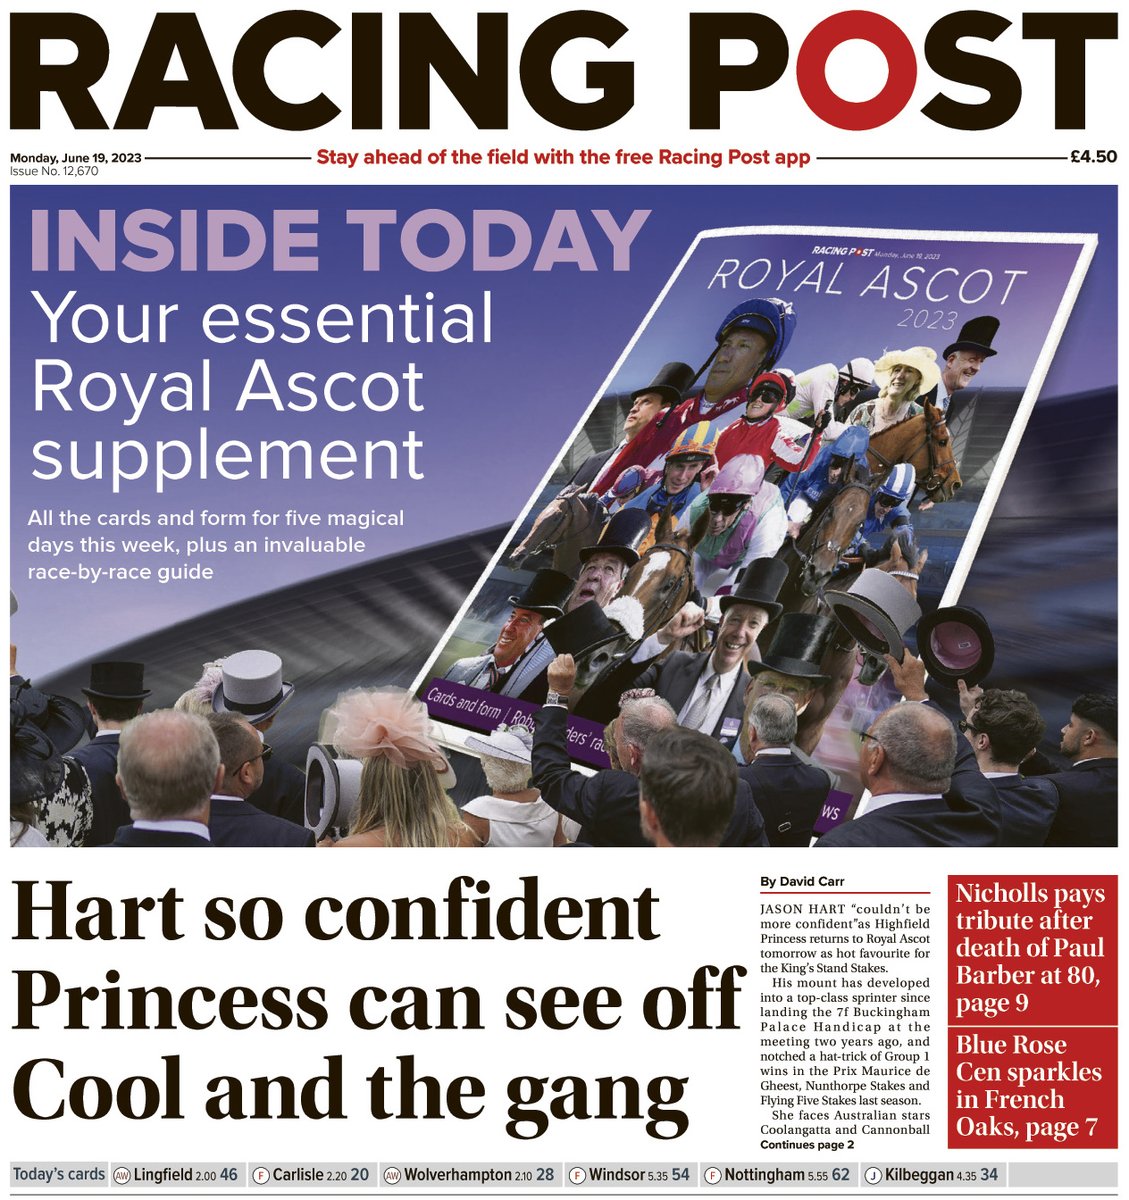 🗞️In tomorrow's Racing Post

⭕️Your essential Royal Ascot supplement⭕️

👀All the cards and form for five magical days this week, plus an invaluable race-by-race guide

🗣️Jason Hart full of confidence as Highfield Princess heads for the King's Stand Stakes